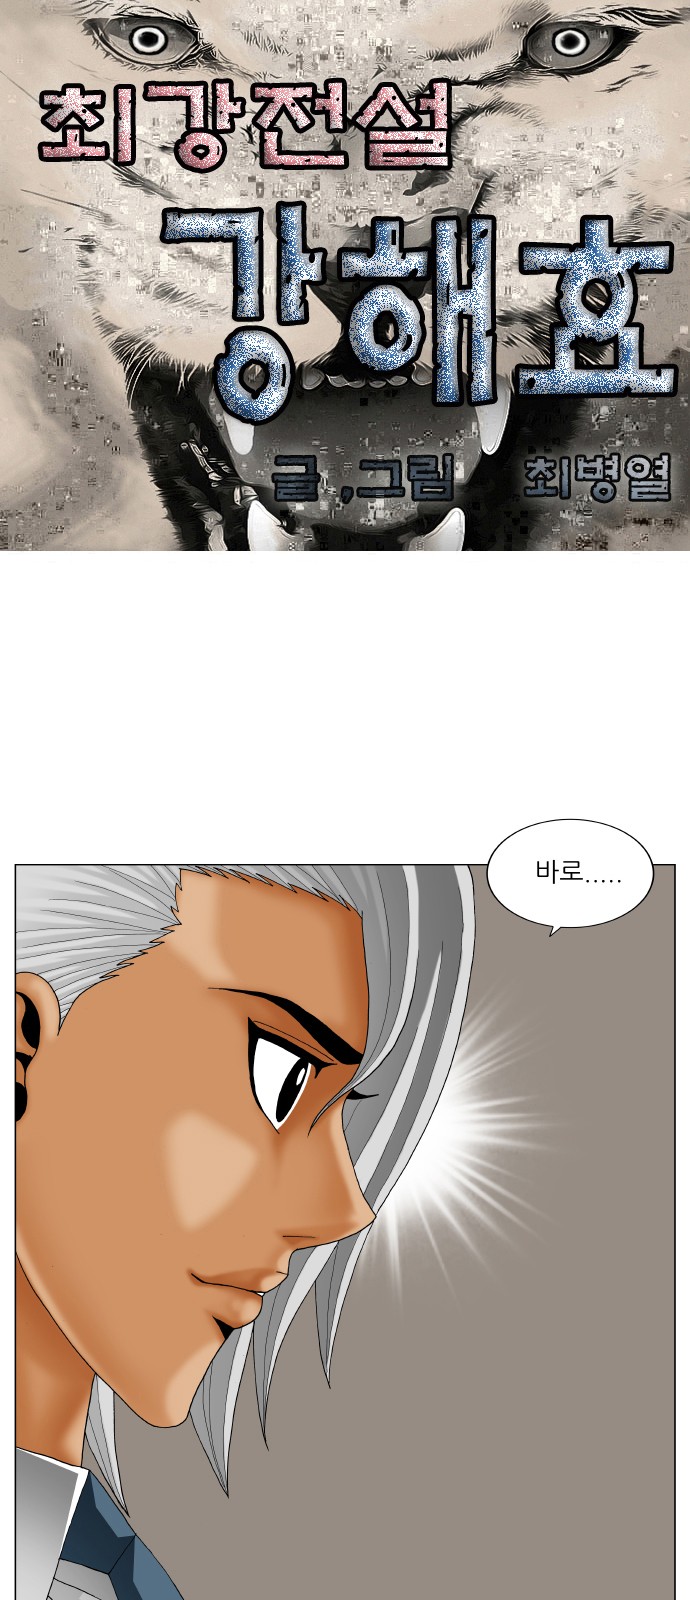 Ultimate Legend - Kang Hae Hyo - Chapter 416 - Page 1